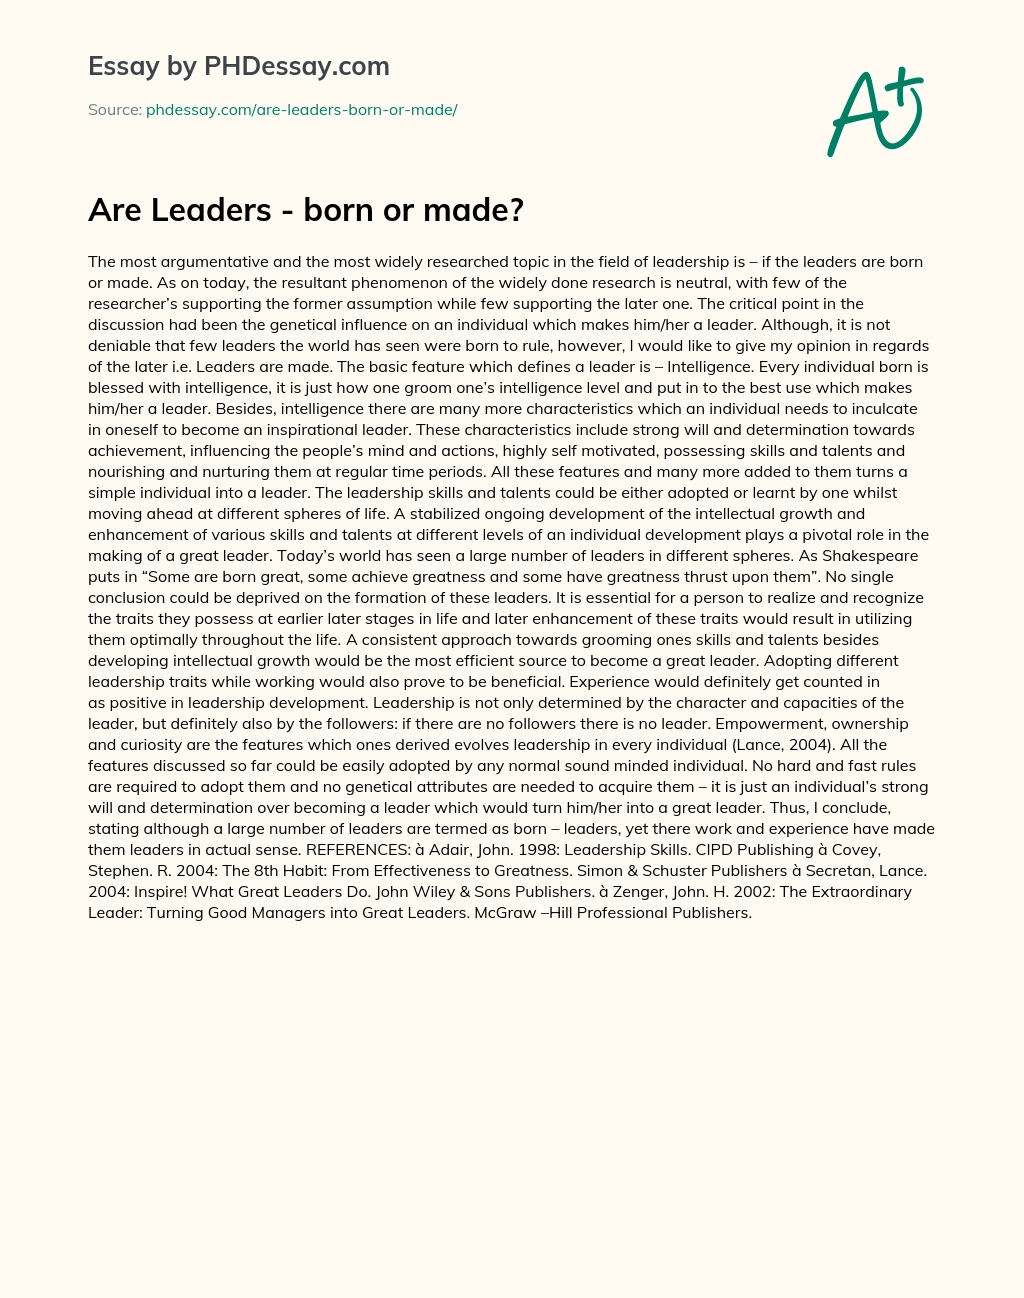 Are Leaders – born or made? essay